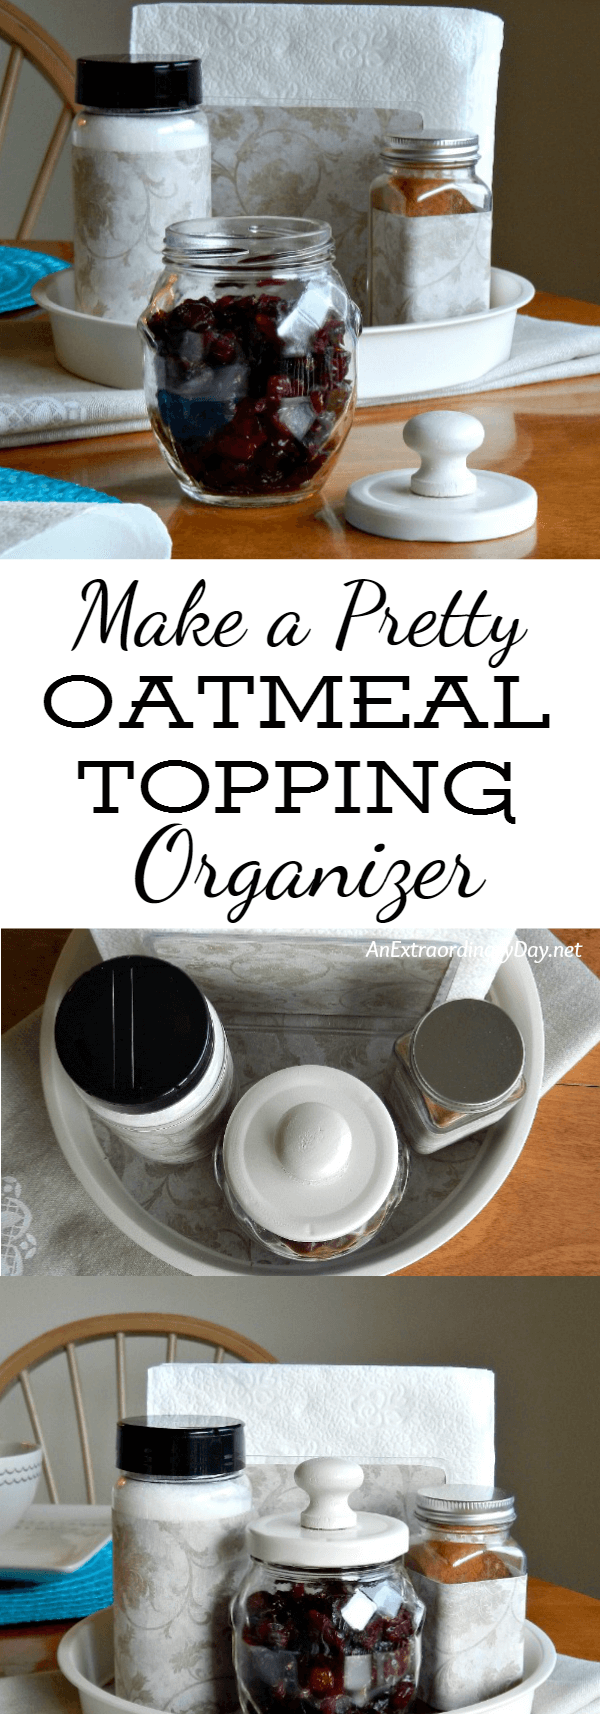 Tutorial to Make an Oatmeal Topping Organizer Breakfast Table Organizer Make Something From Nothing - Recycle, Upcycle, Re-use